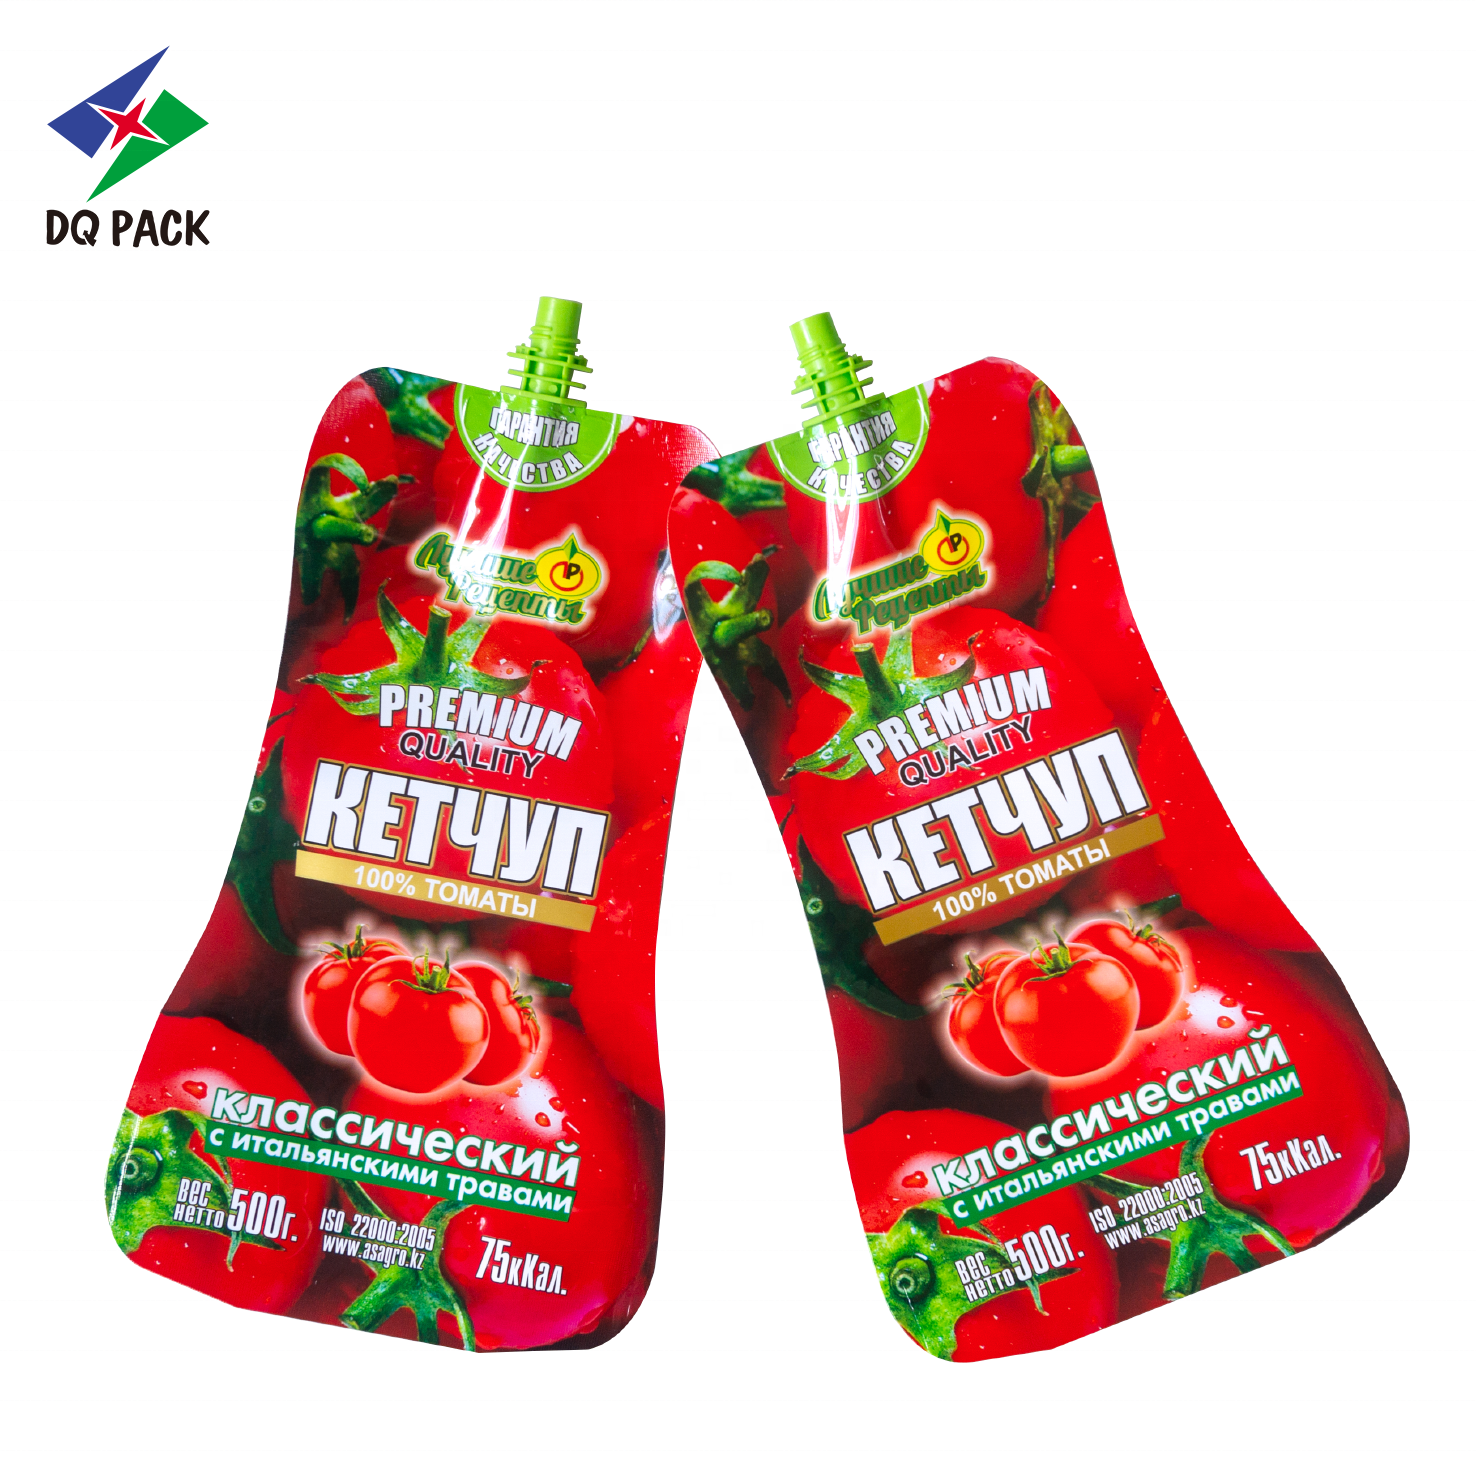 DQ PACK Wholesale Ketchup Plastic Packaging Bag Stand up Spout Pouch For Tomato Sauce